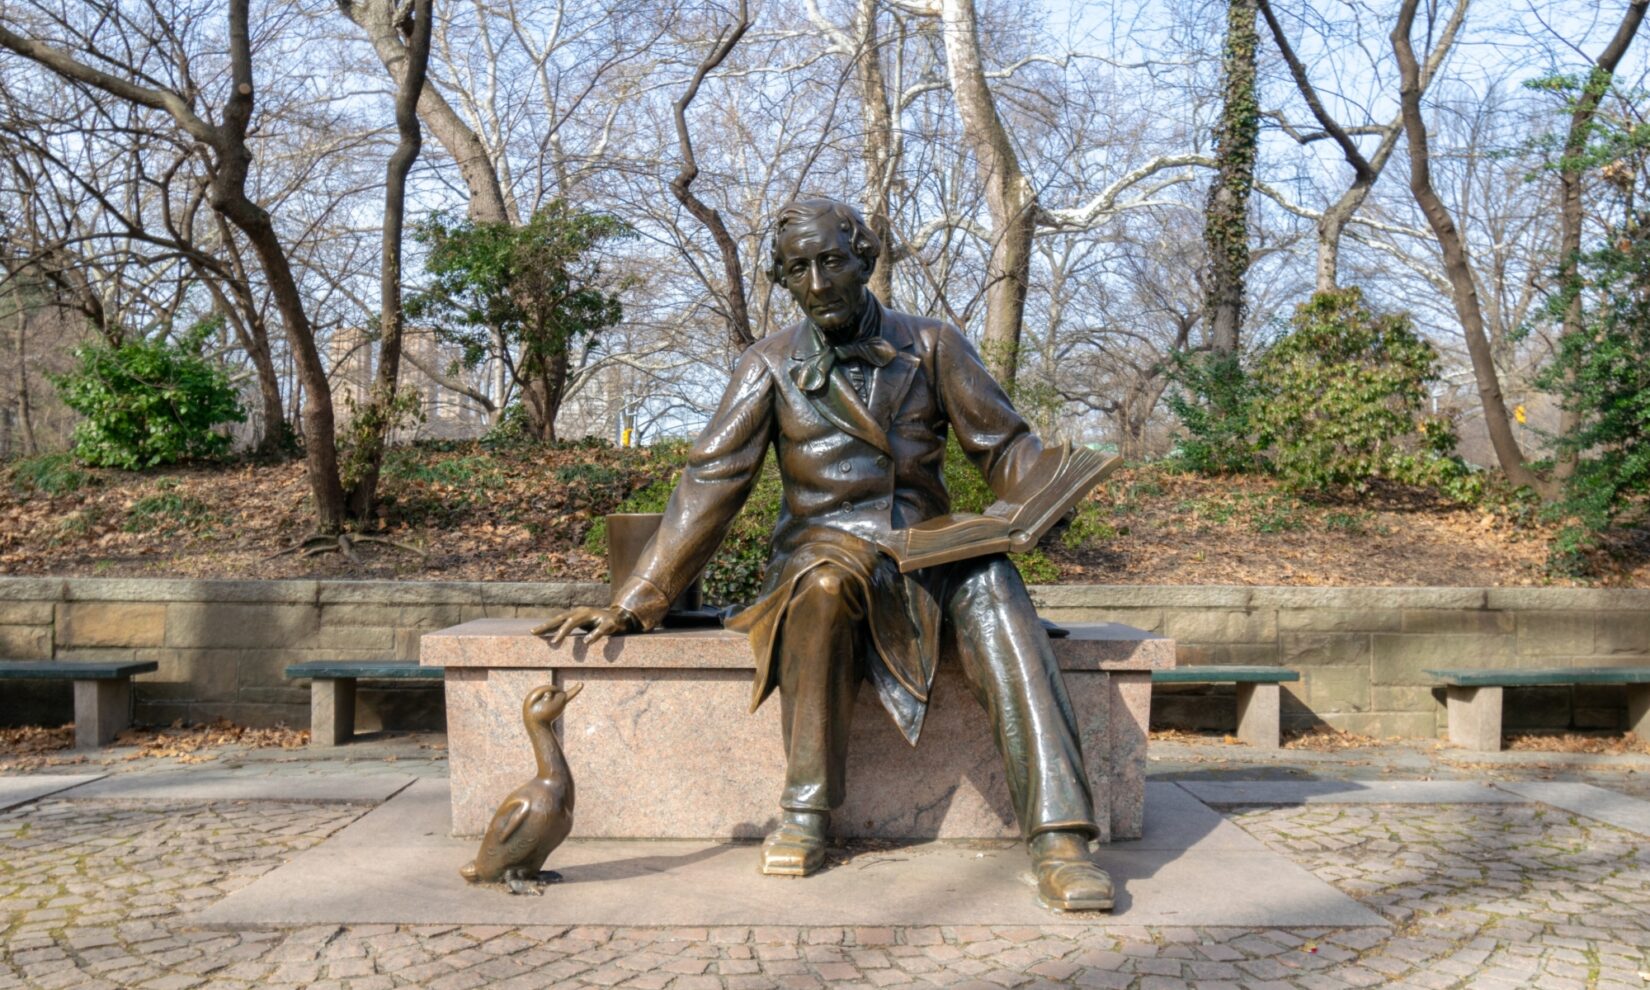 George Delacorte seated on the lap of the Alice in Wonderland statue